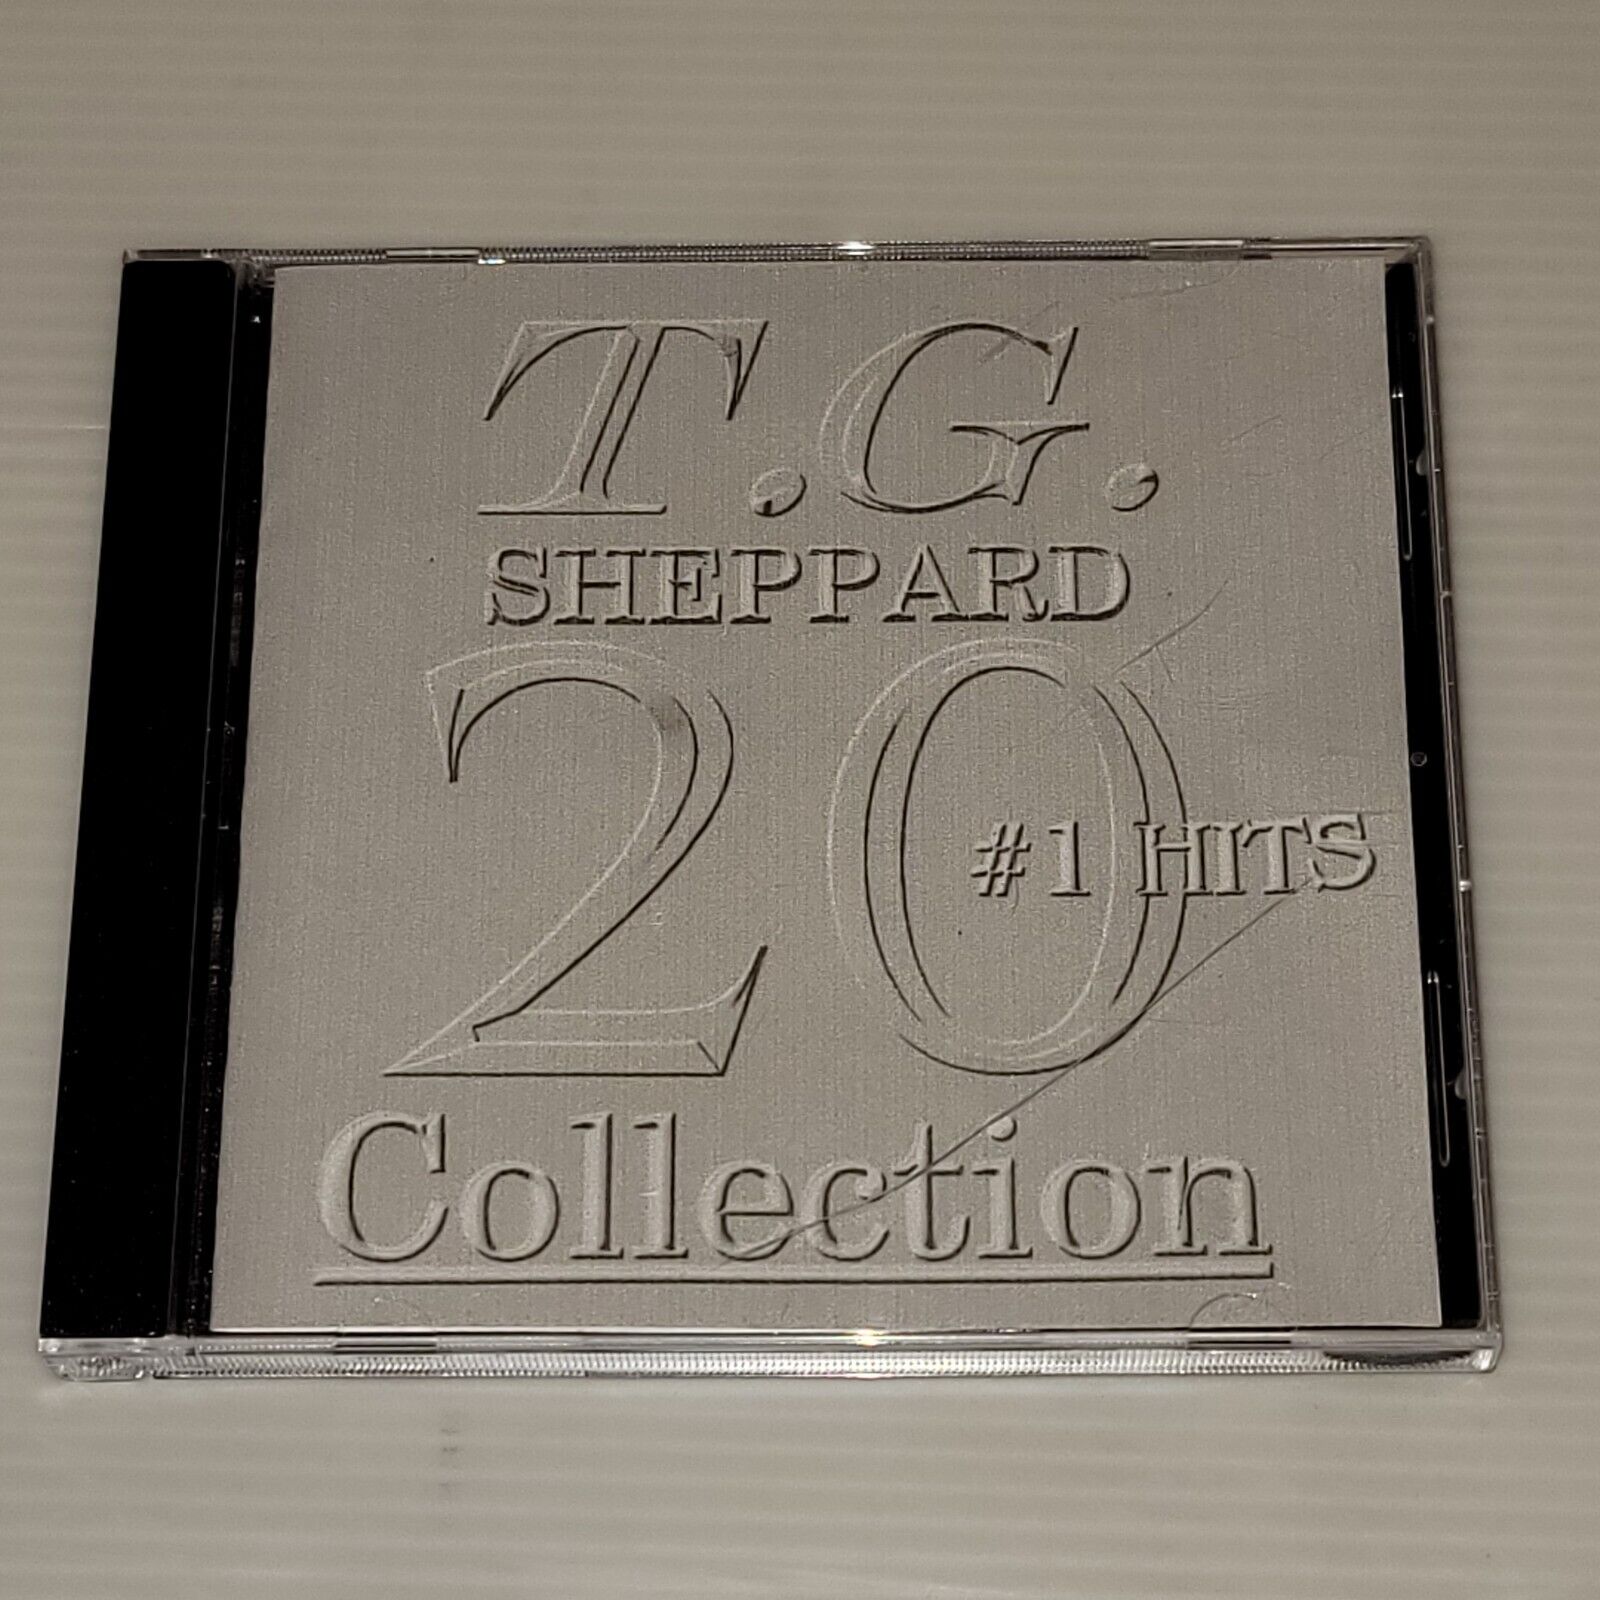 T.G. Sheppard 20 # 1 Hits Collection CD